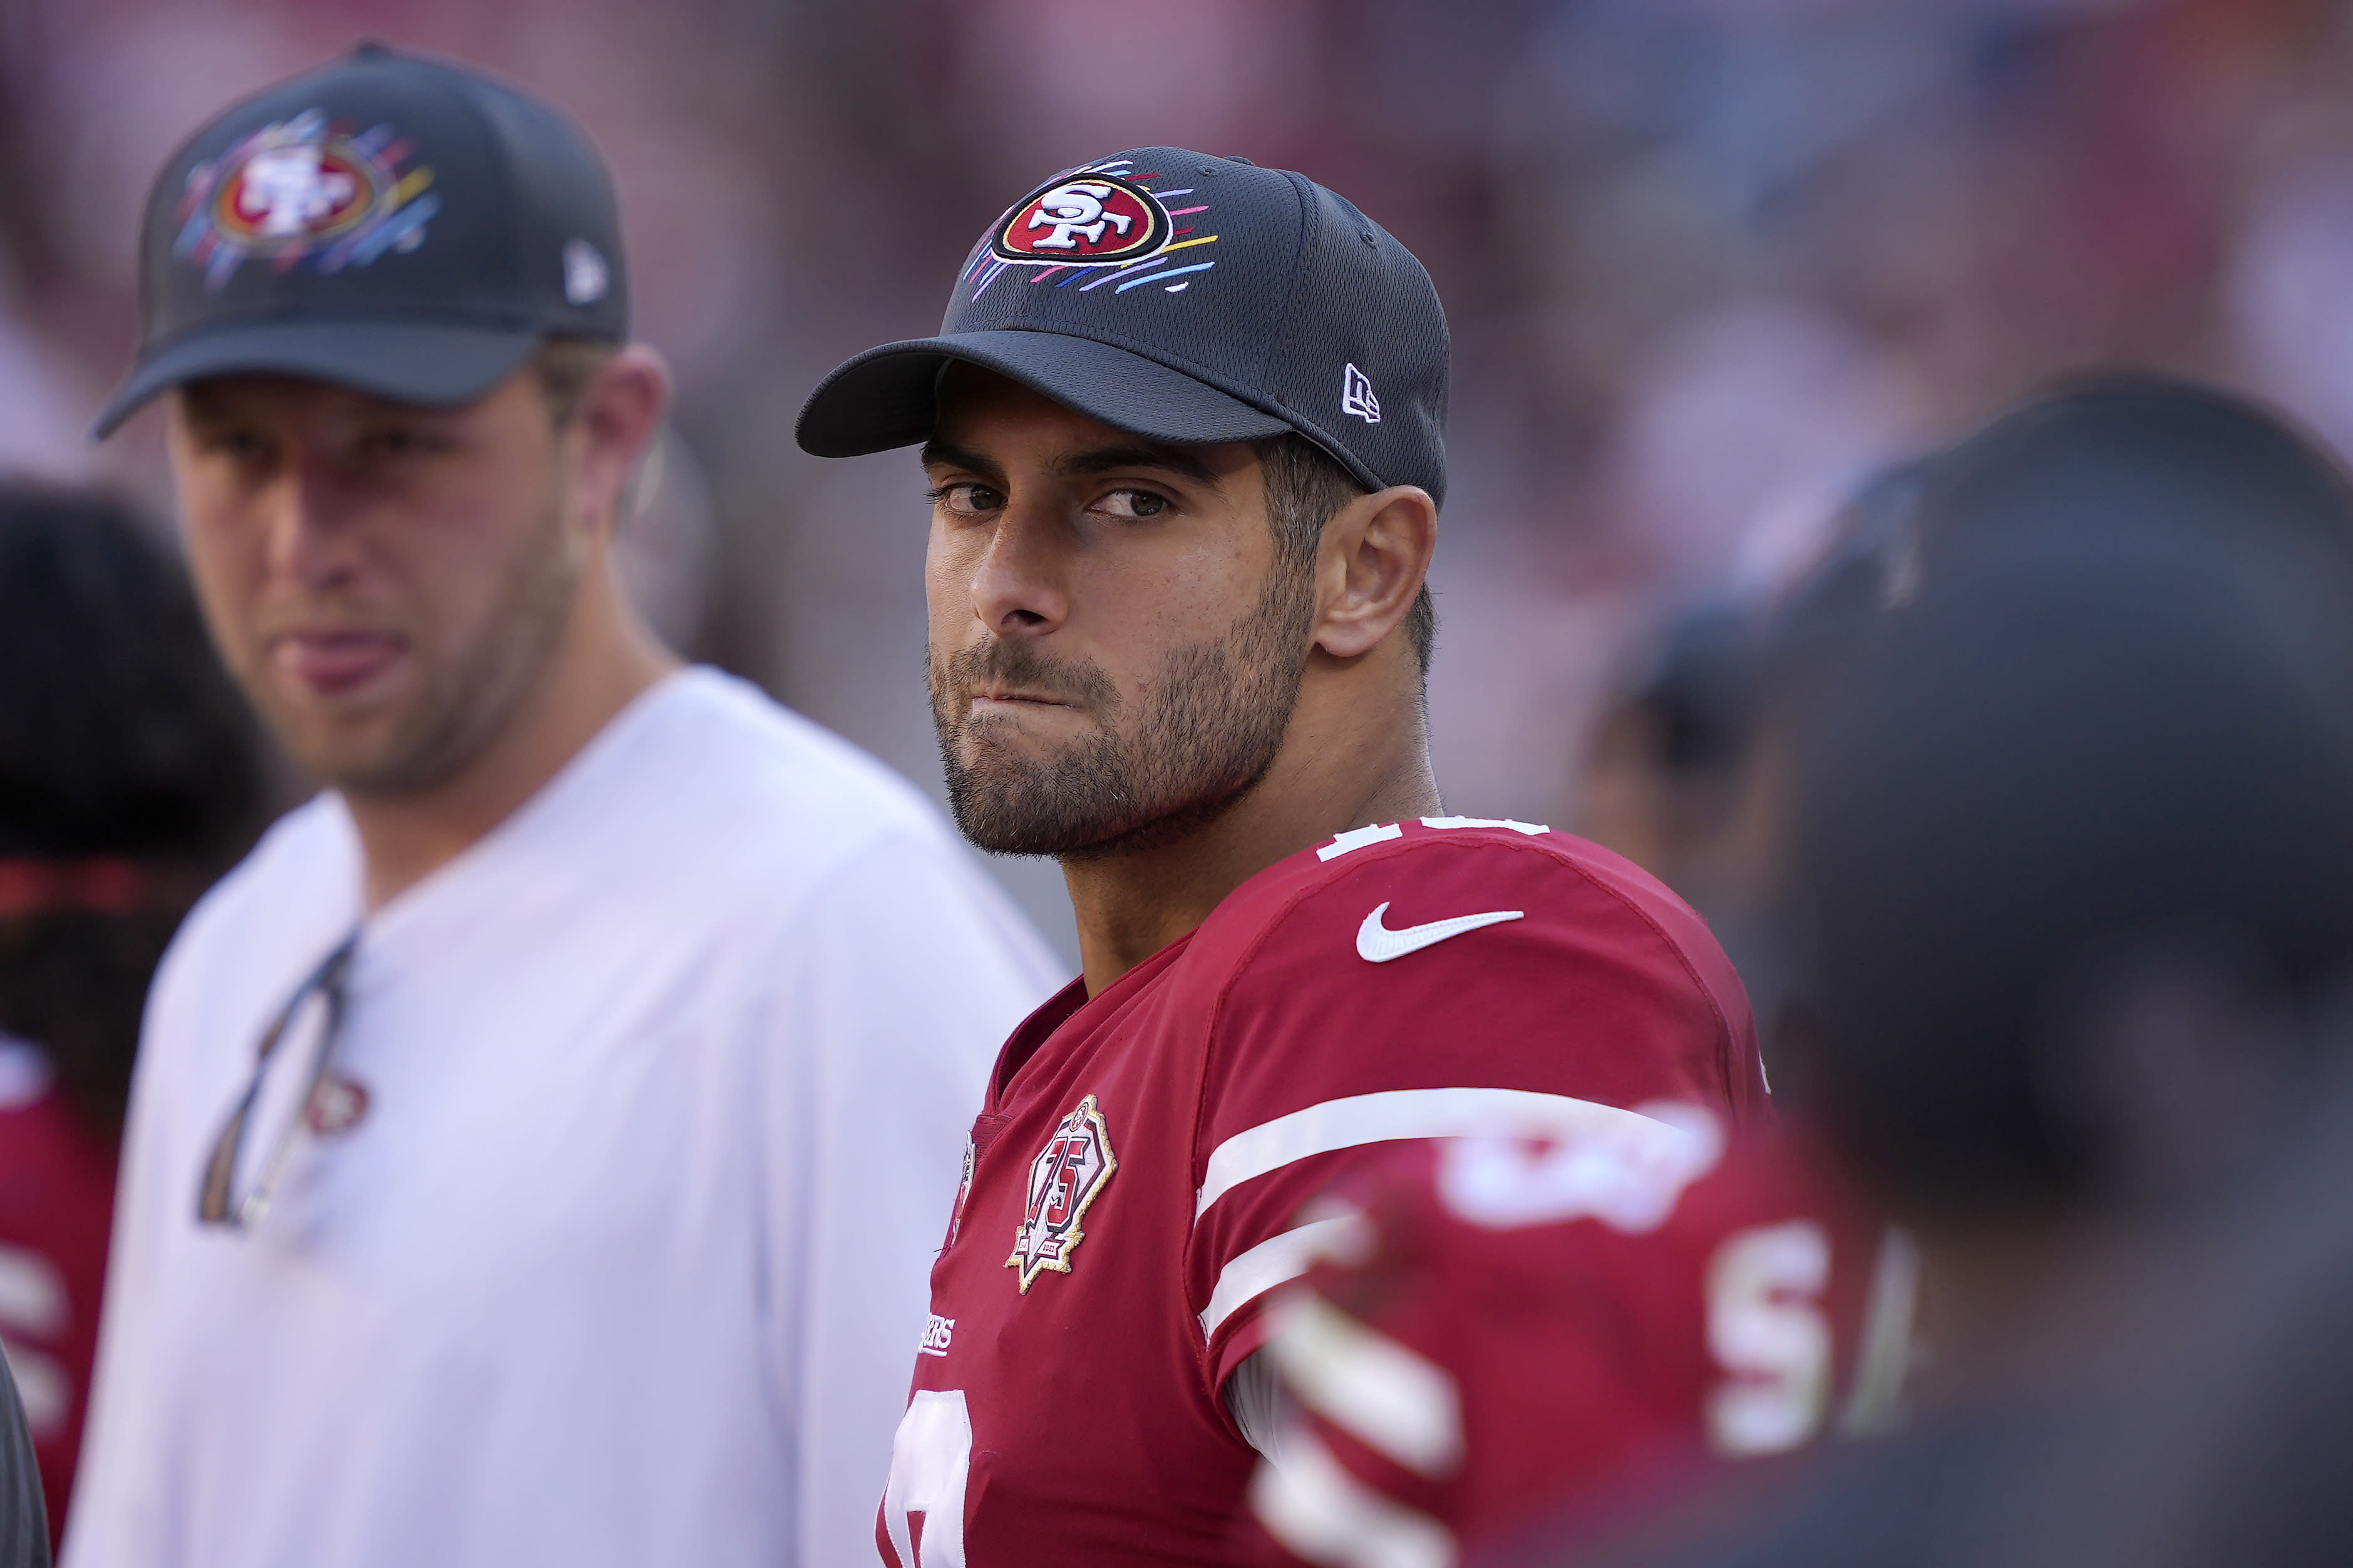 Garoppolo after latest injury: 'It’s getting real old'